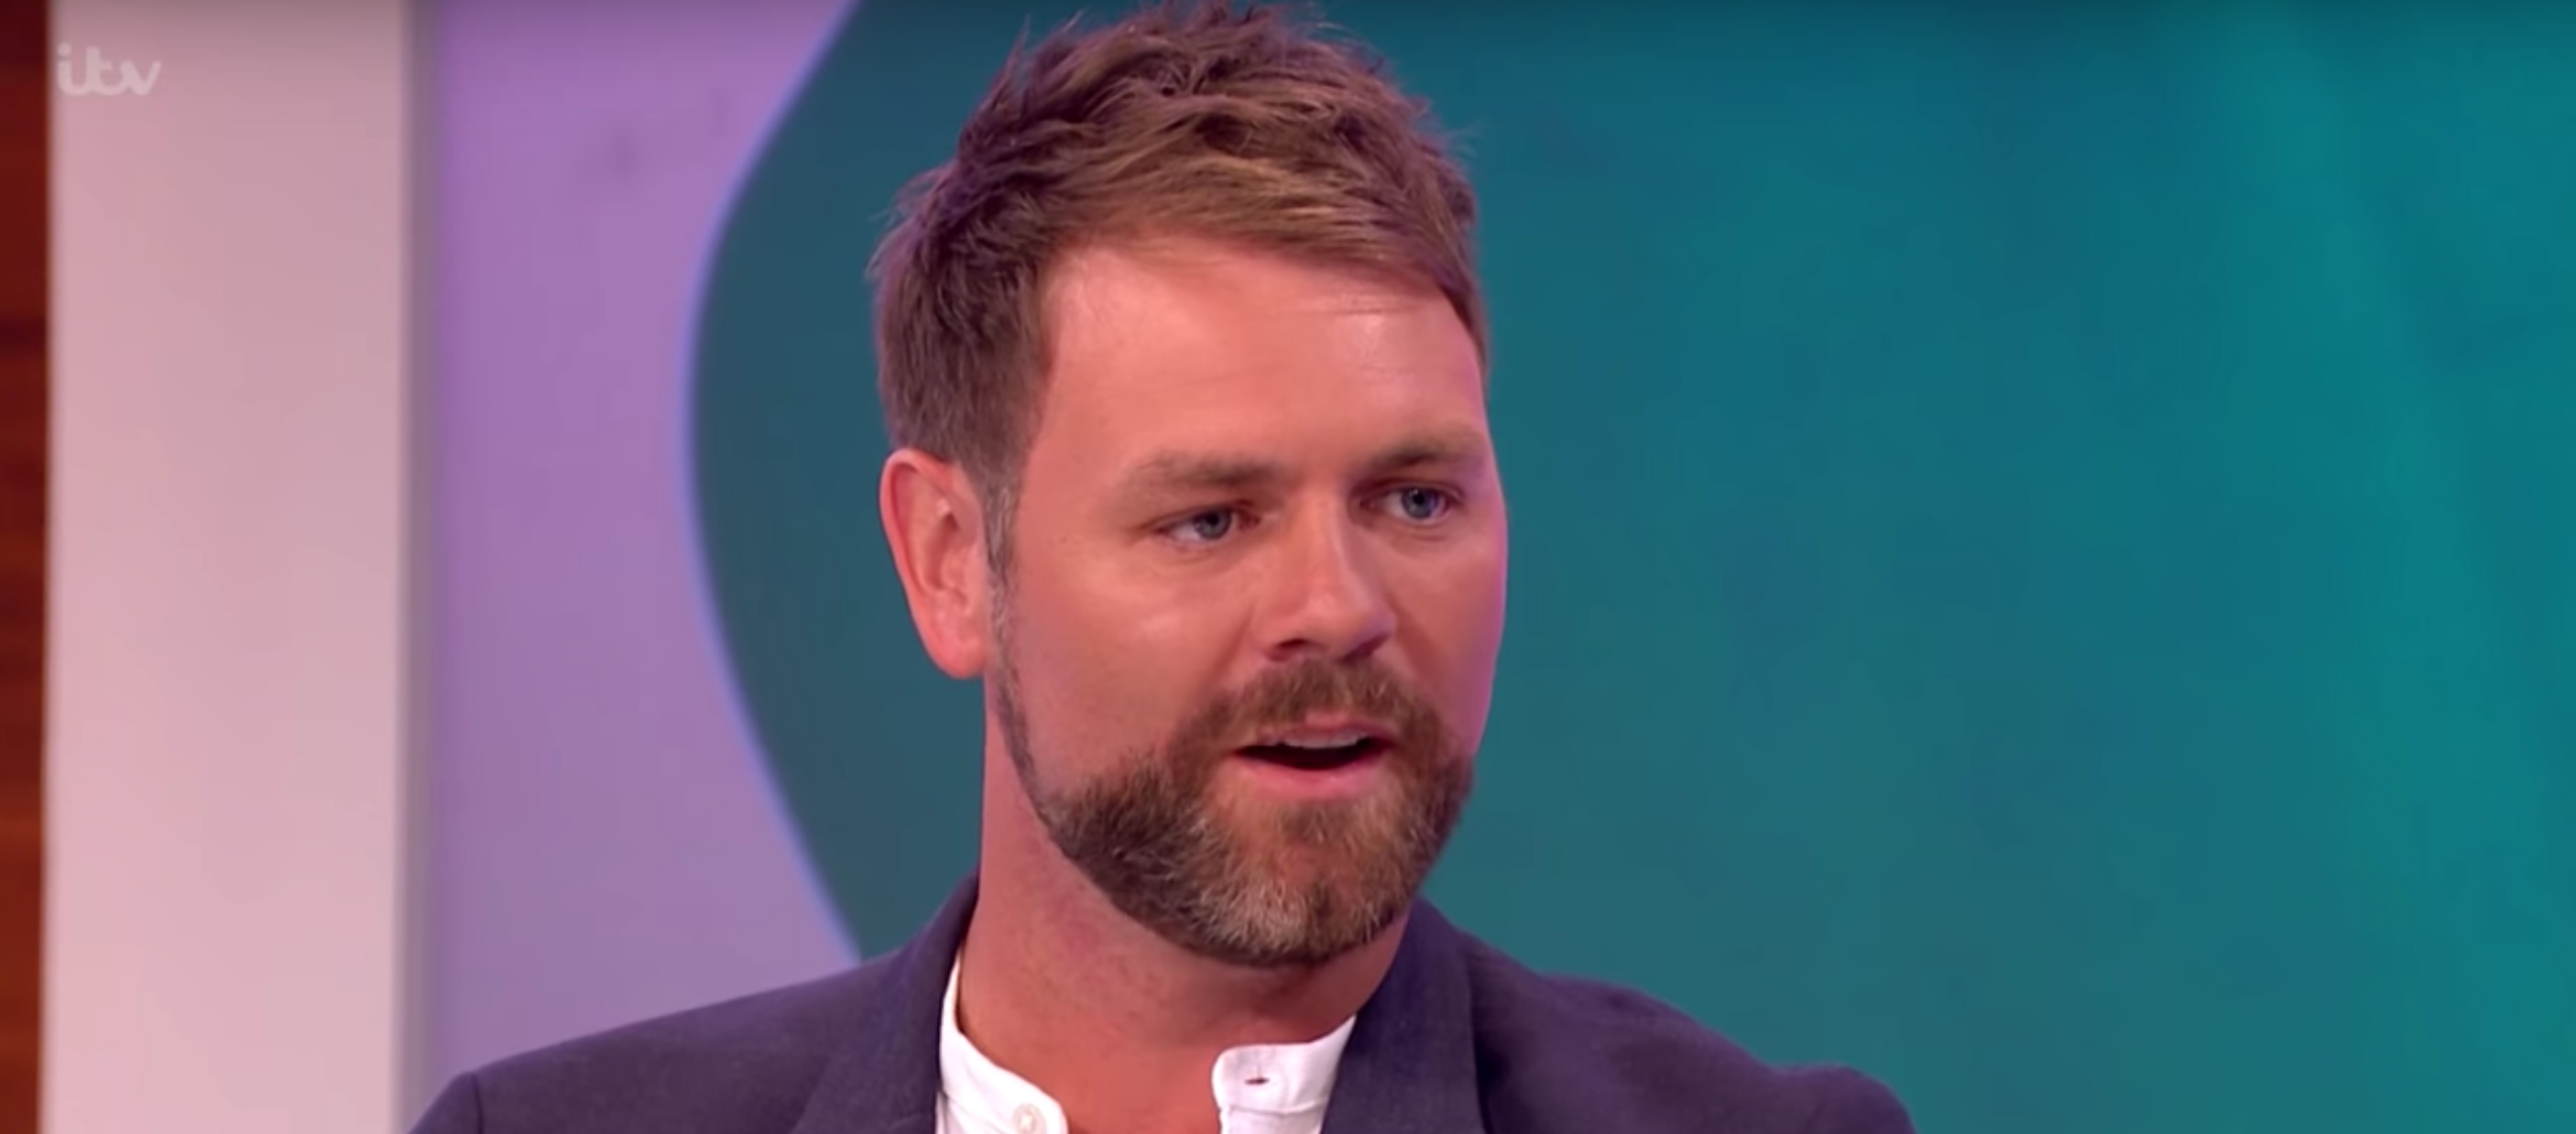 Westlife S Brian Mcfadden Admits Regretting Trying To Buy His Children S Love